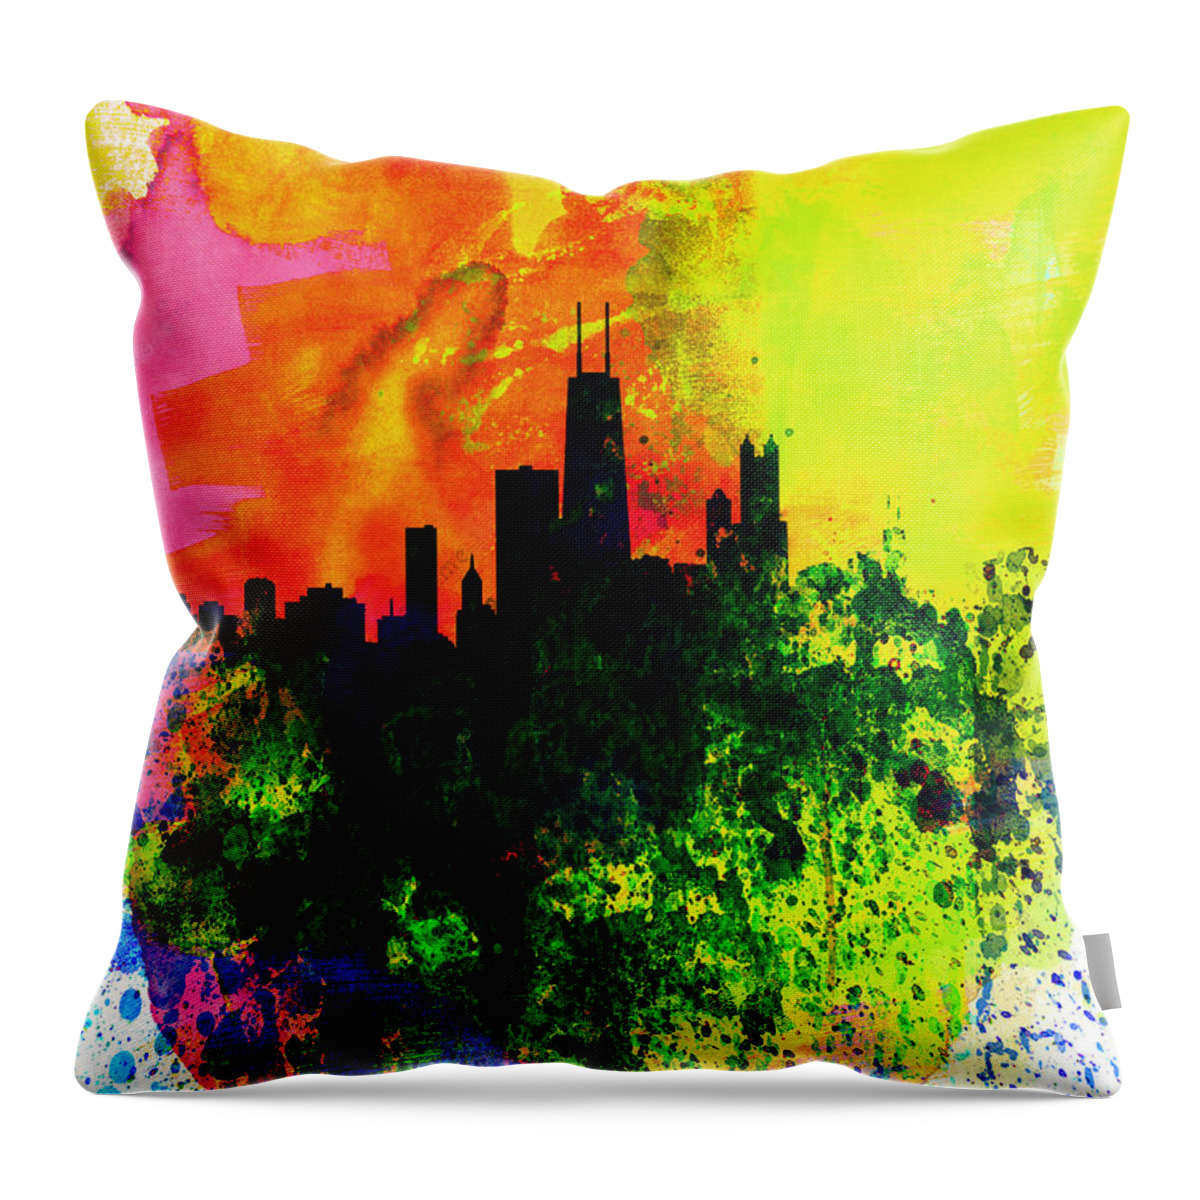 Chicago Throw Pillow featuring the painting Chicago Watercolor Skyline by Naxart Studio